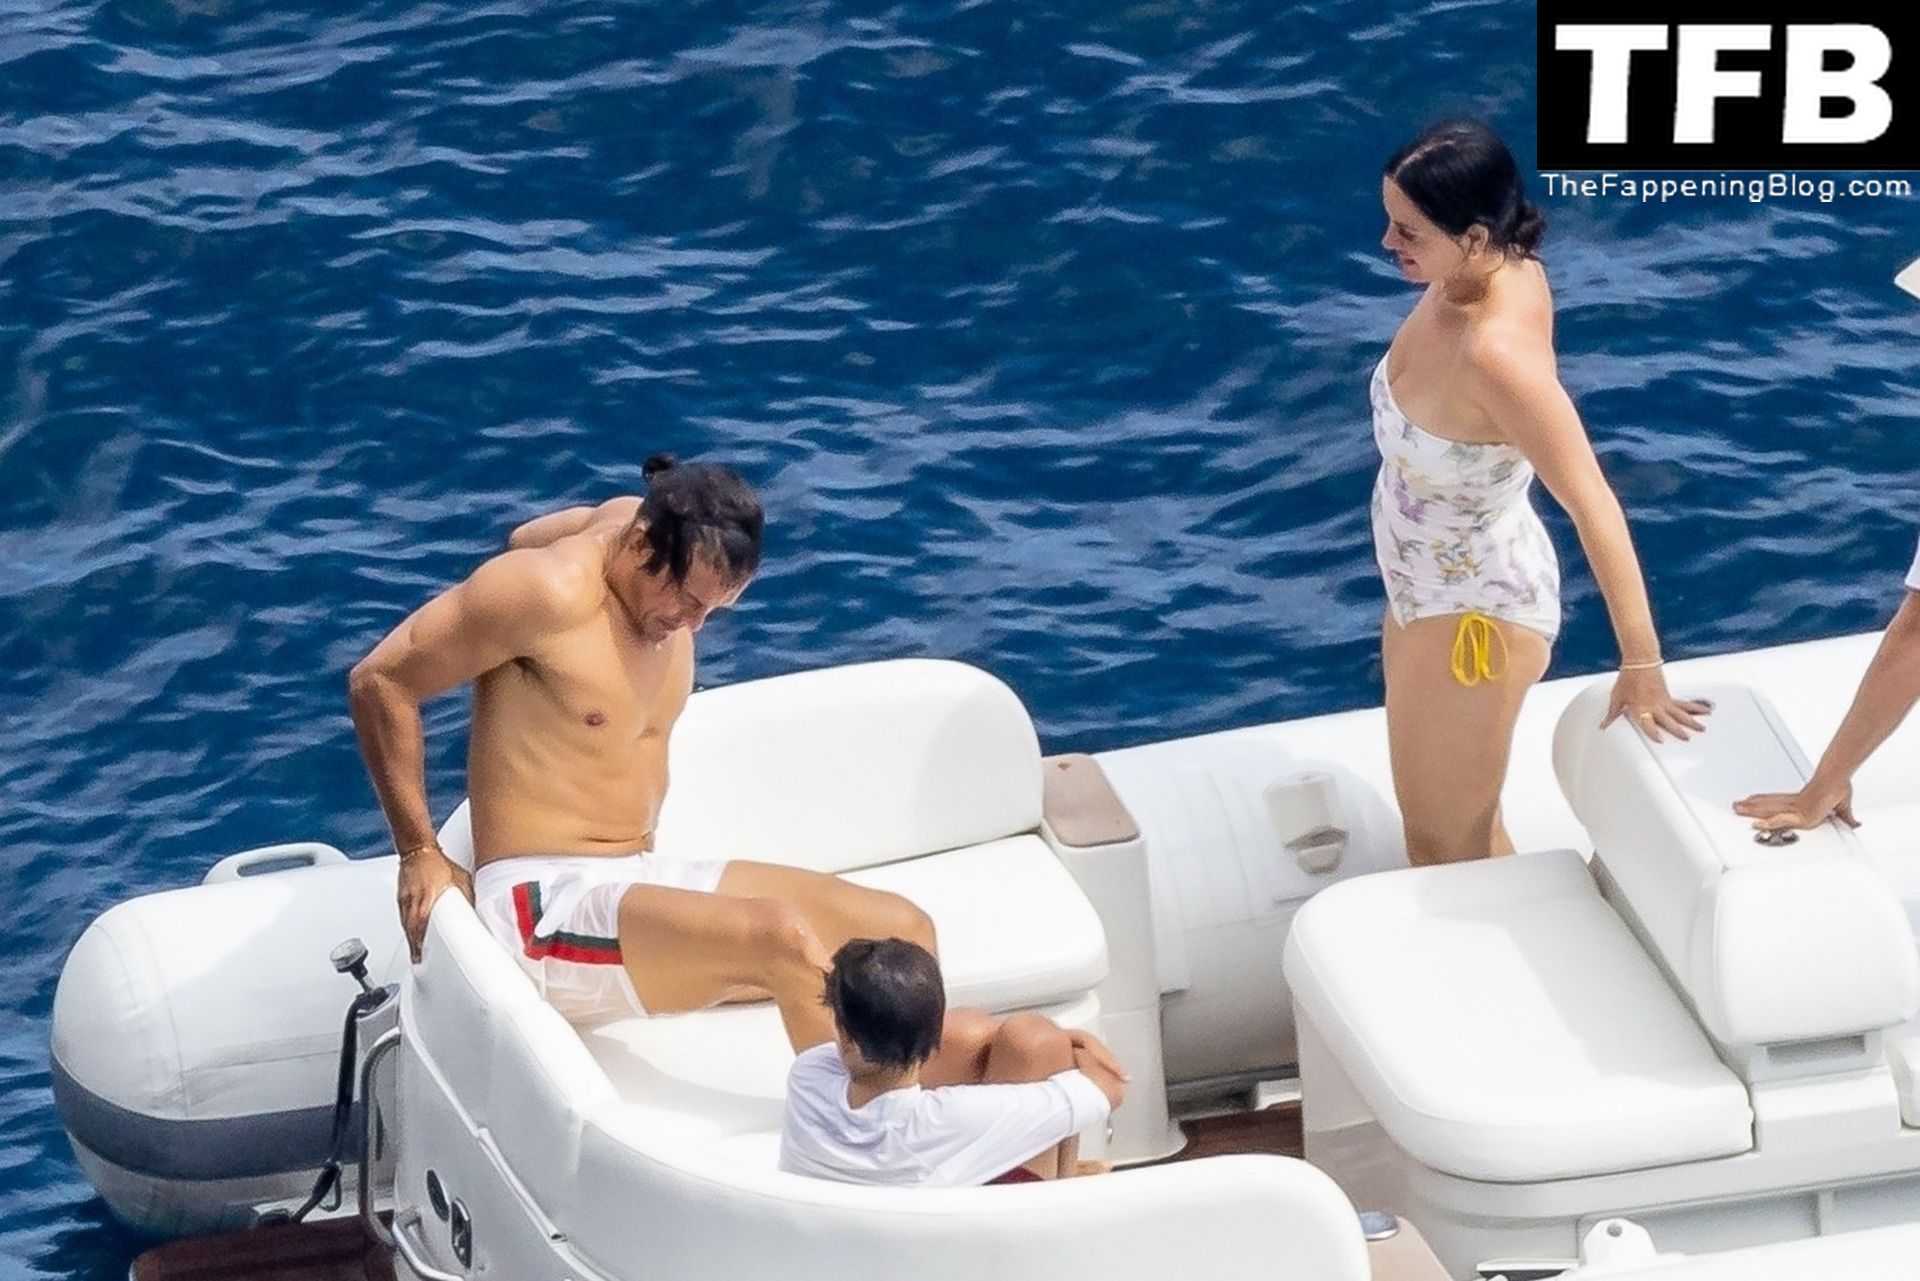 Katy Perry Sexy The Fappening Blog 11 - Katy Perry Rocks a Strapless Swimsuit While Enjoying a Beach Day with Orlando Bloom in Positano (105 Photos)